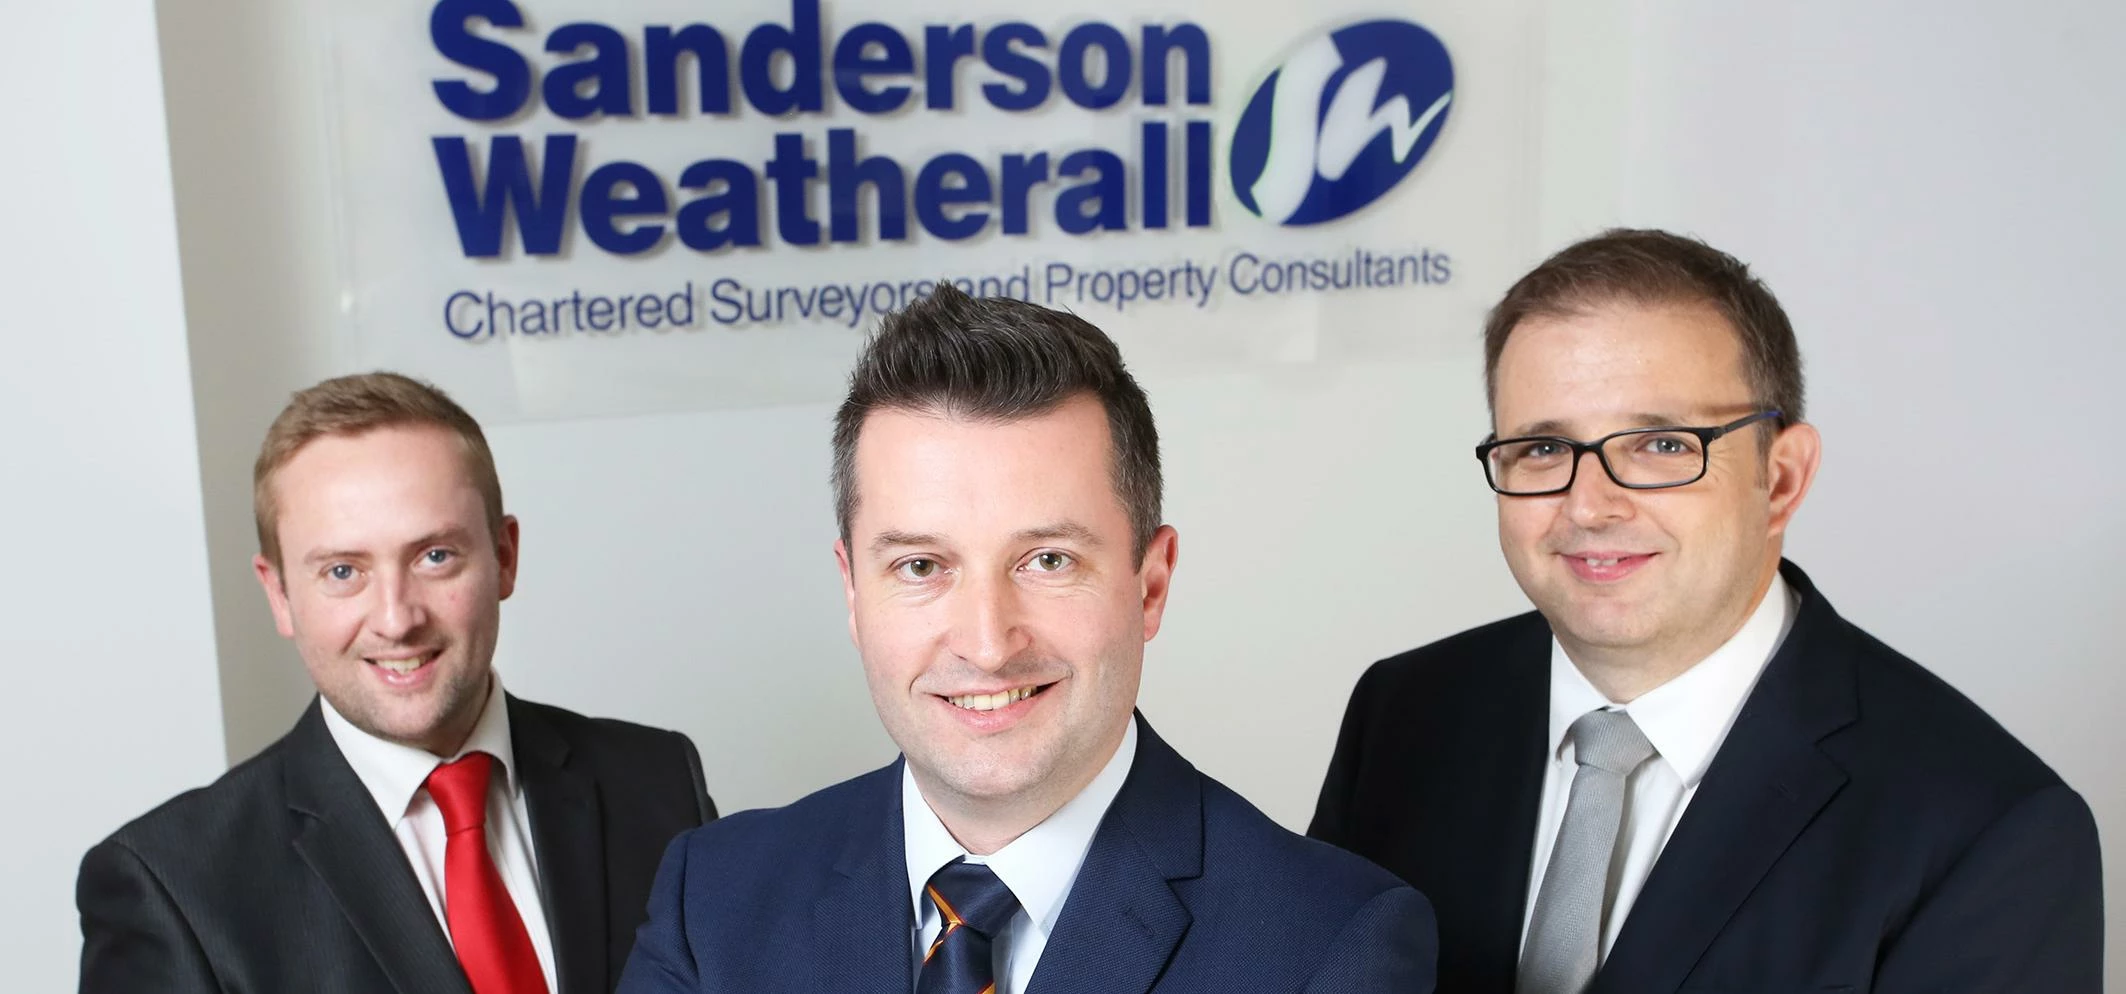 L-R: Sanderson Weatherall partner Christian Humphreys with associate partners Chris Brooke and Lee J